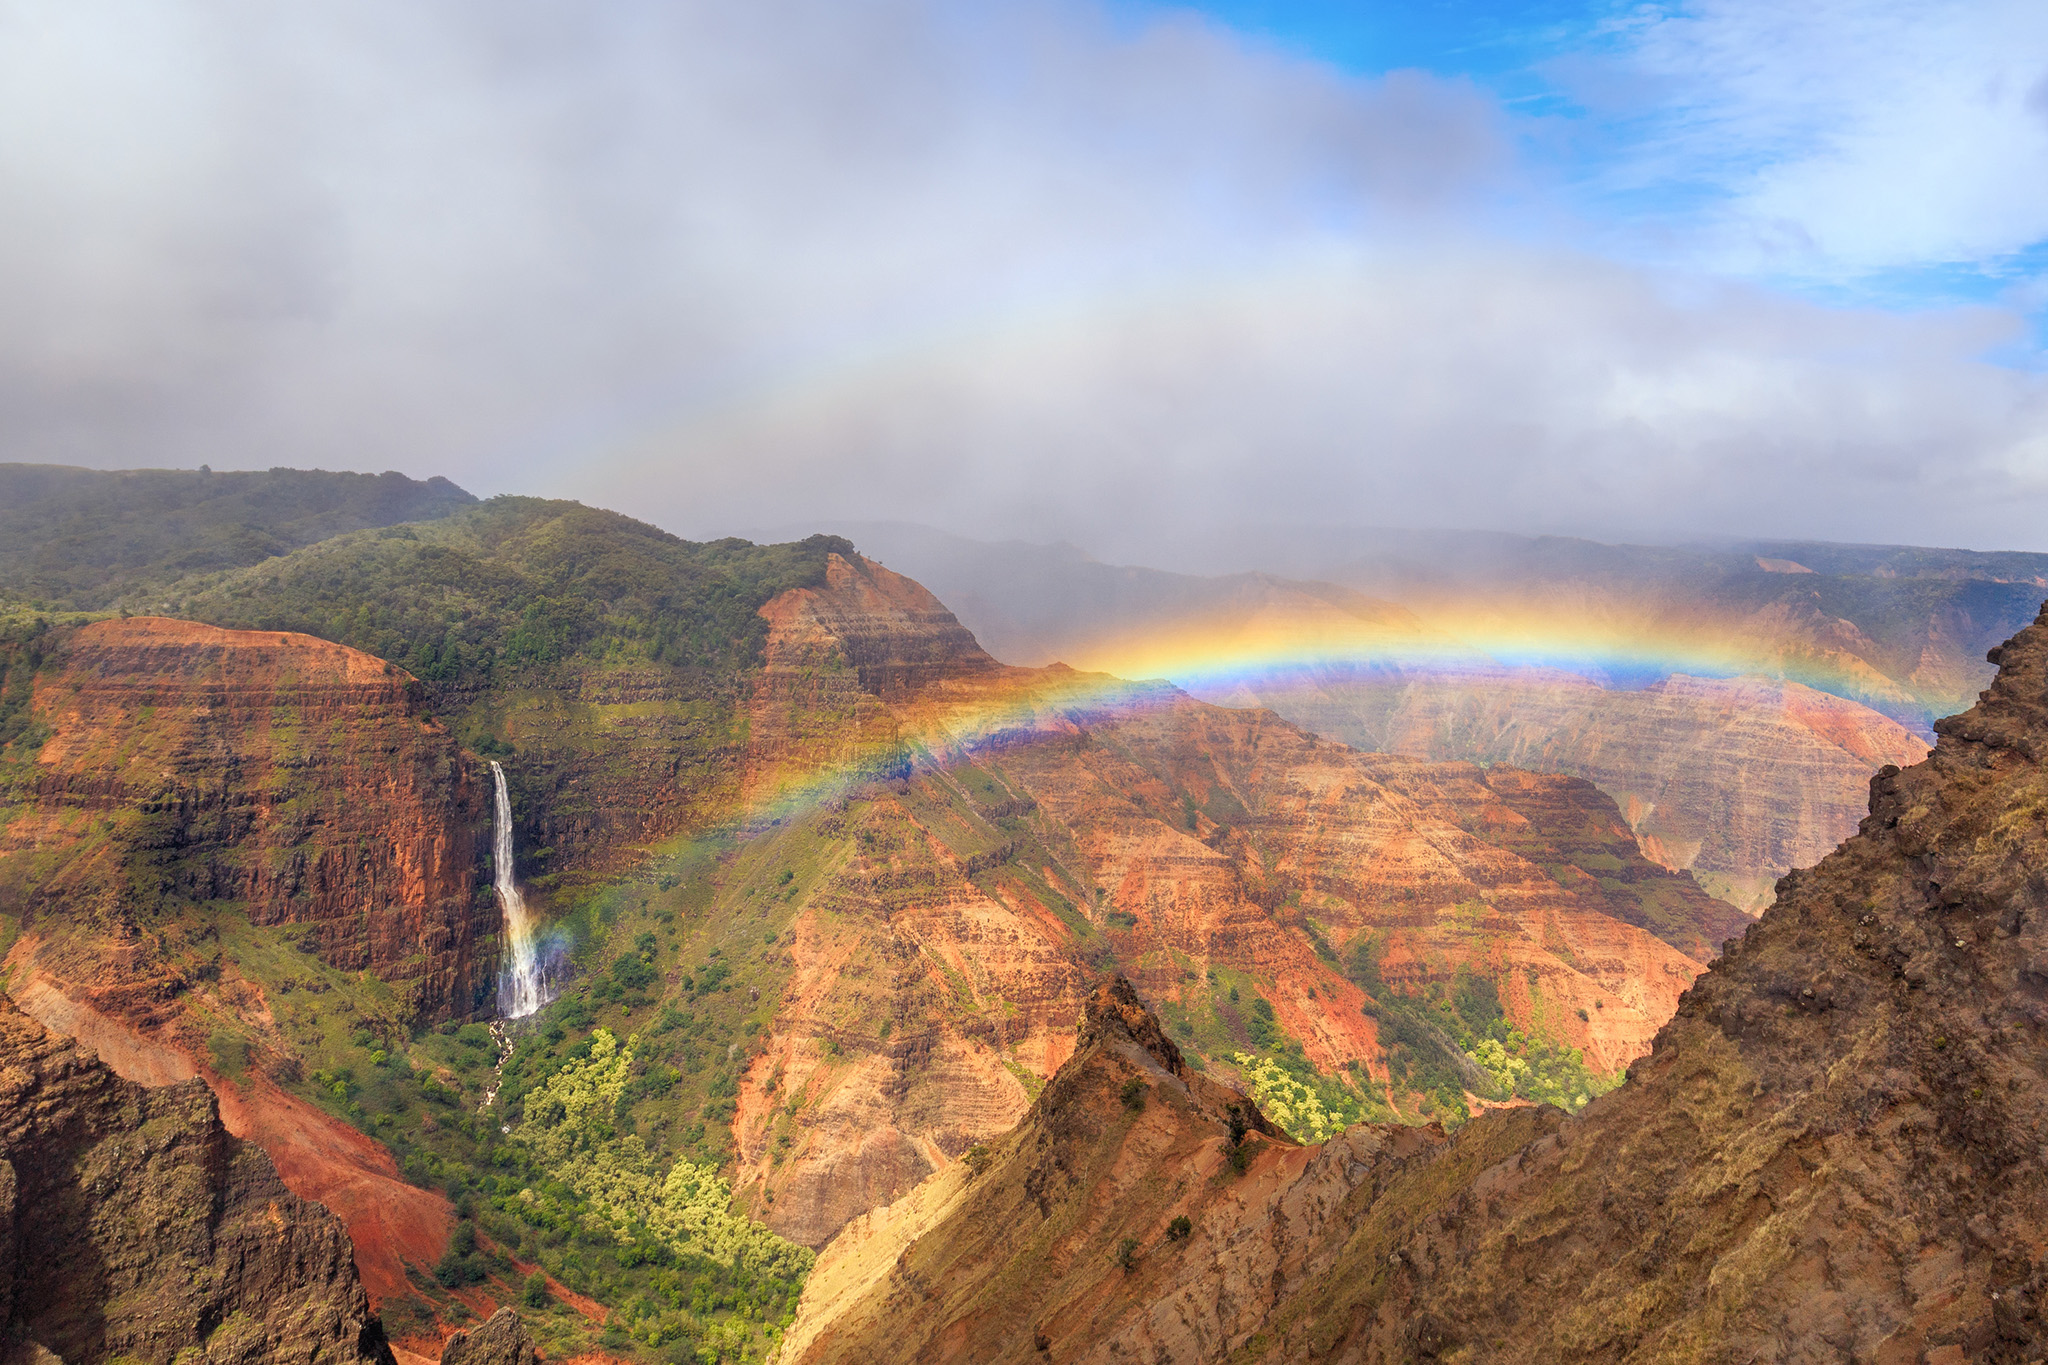 Can Kauai protect itself from becoming the next Maui?